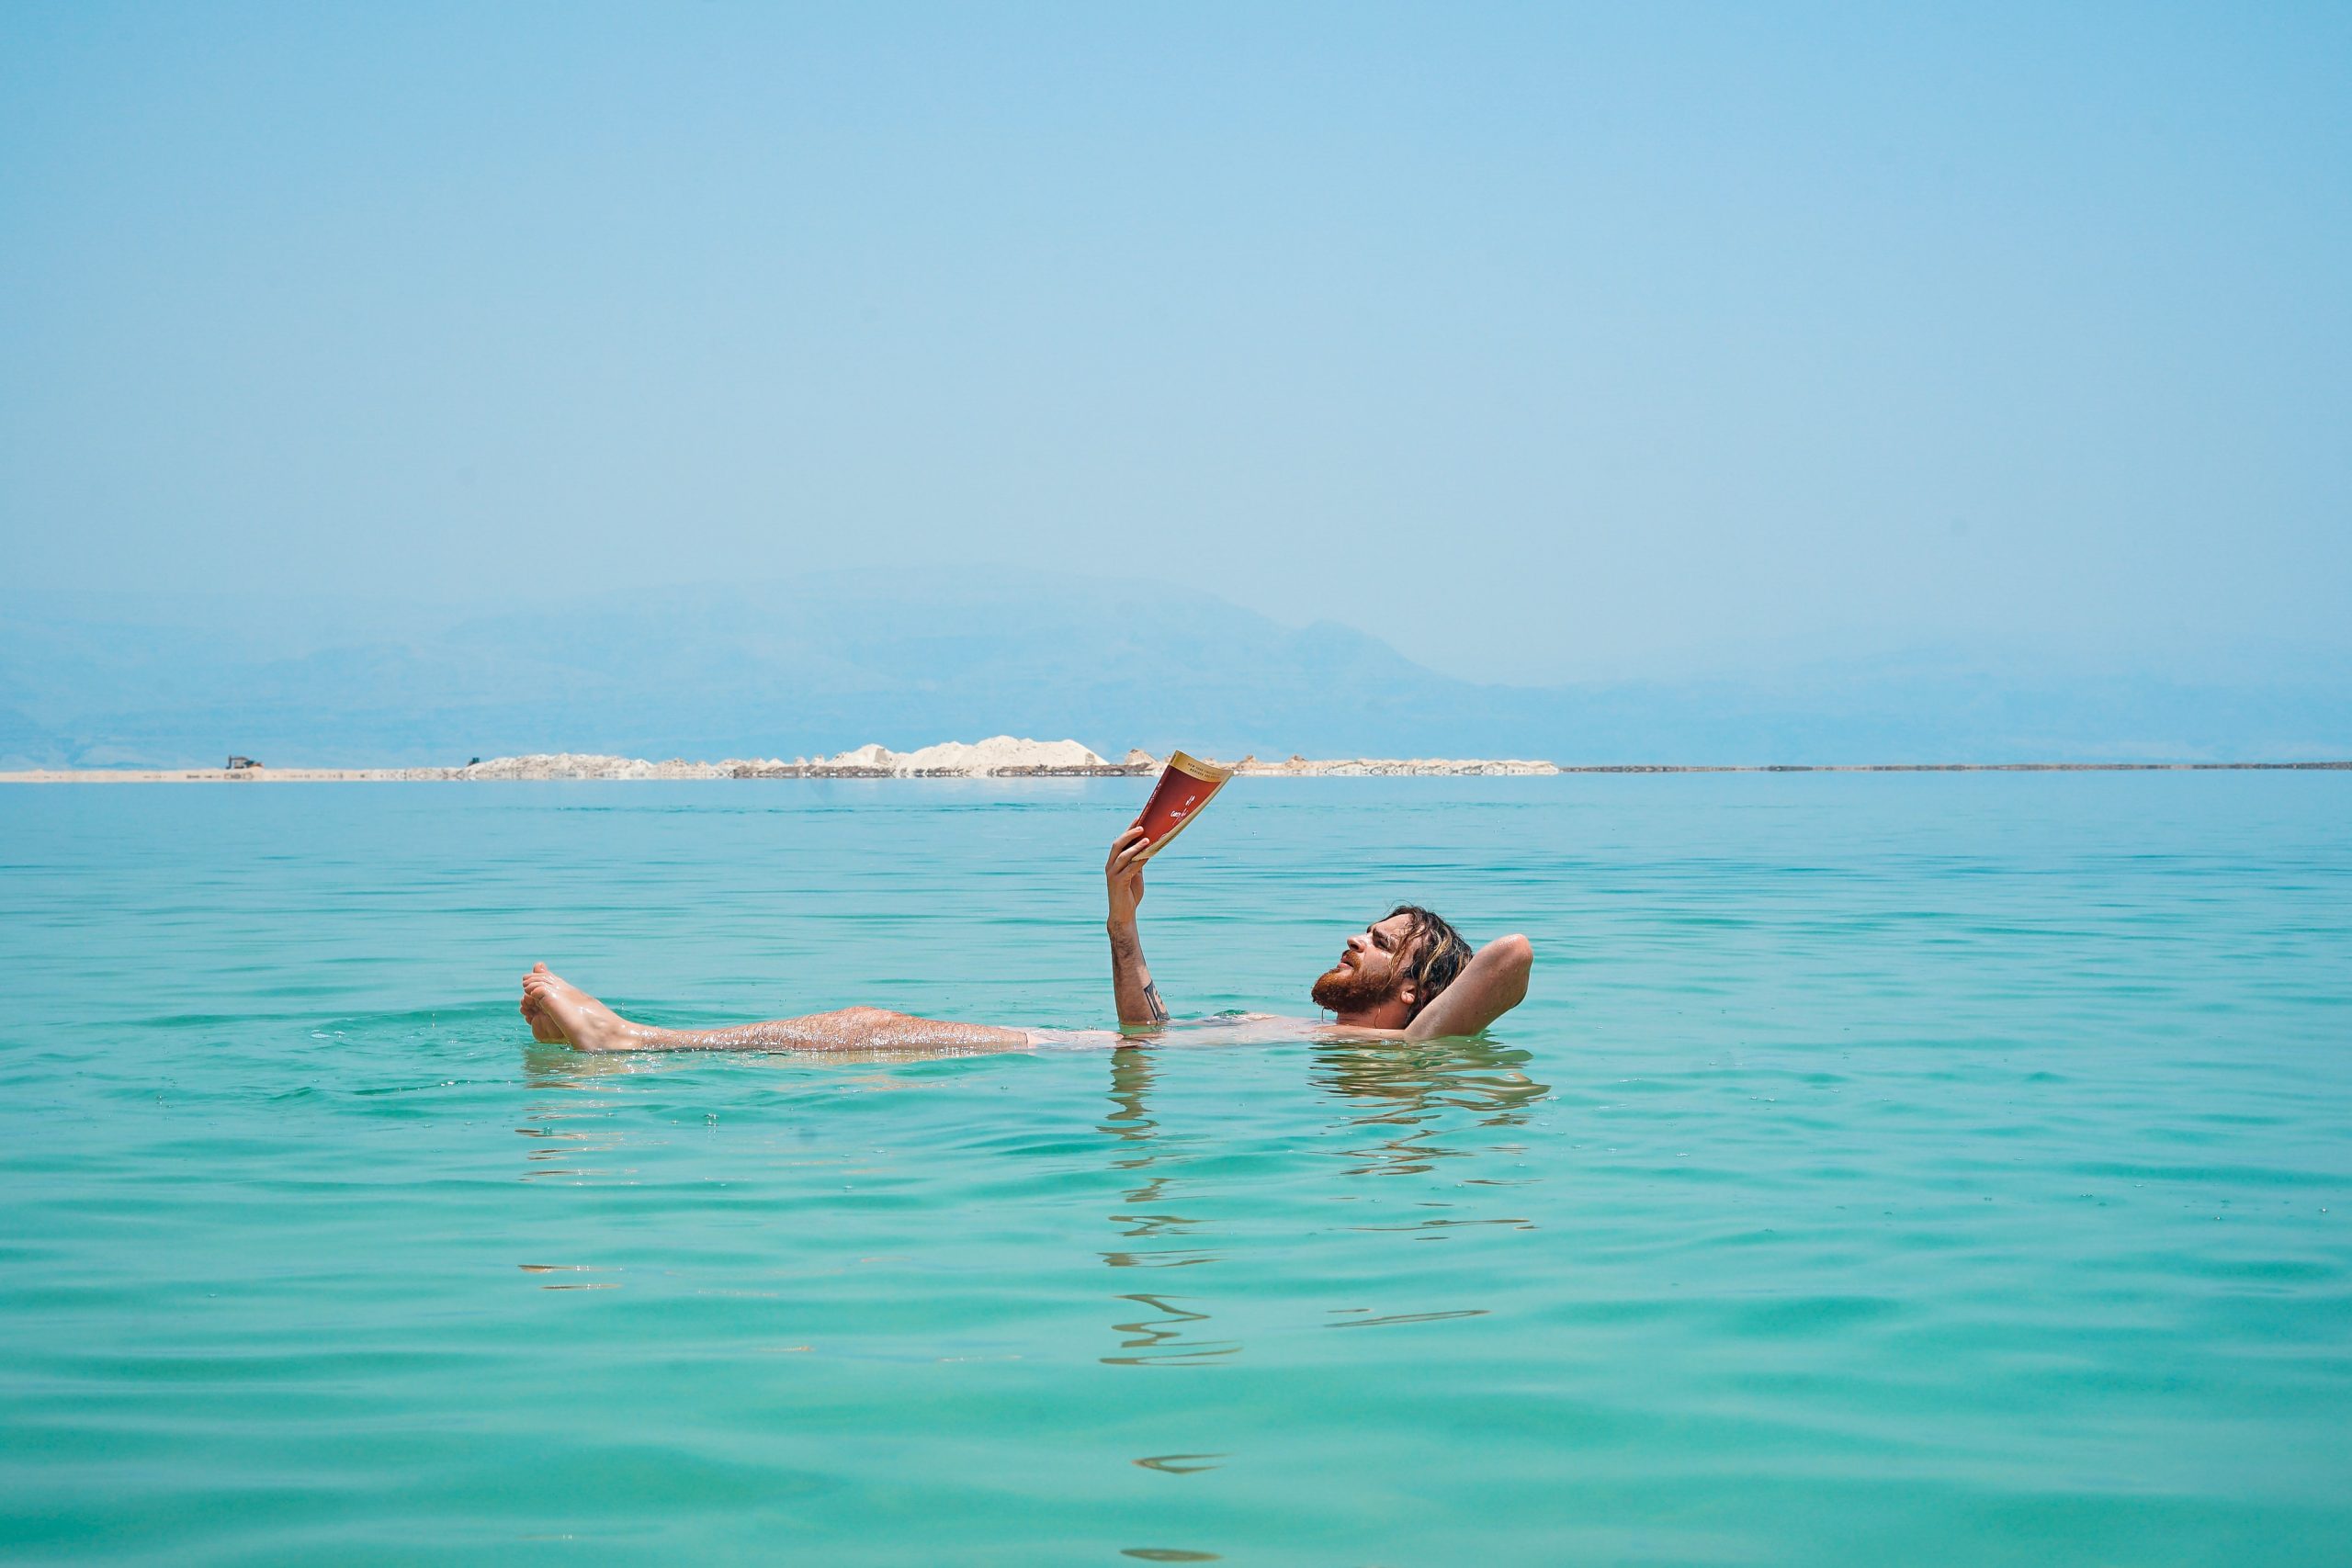 Visit the dead sea: a trip that you will never forget.